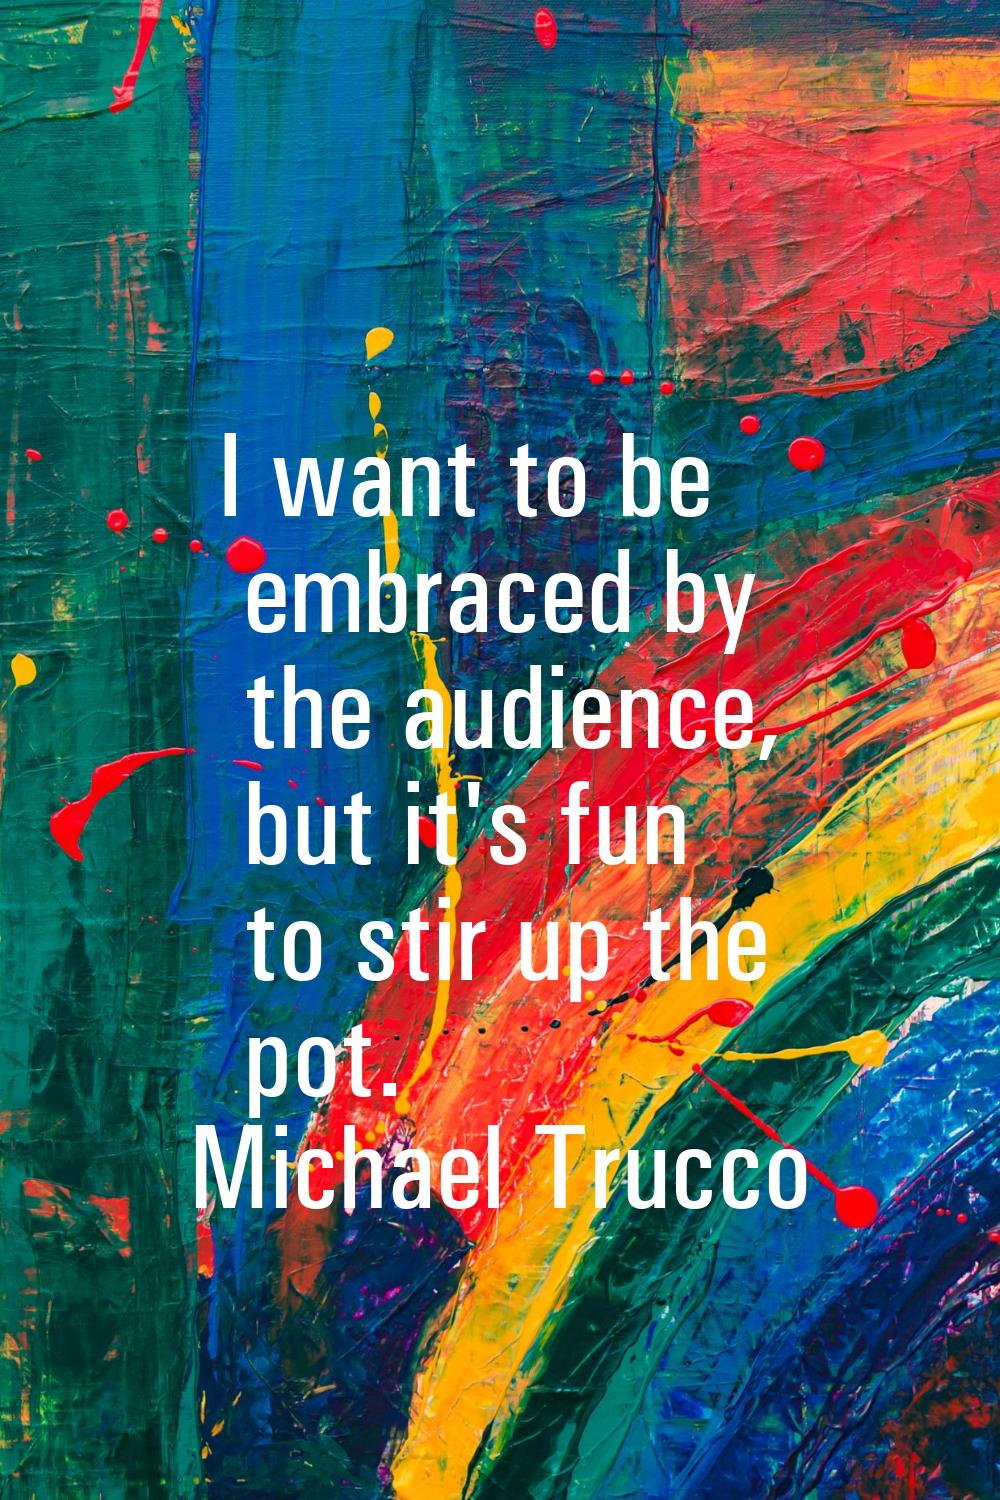 I want to be embraced by the audience, but it's fun to stir up the pot.